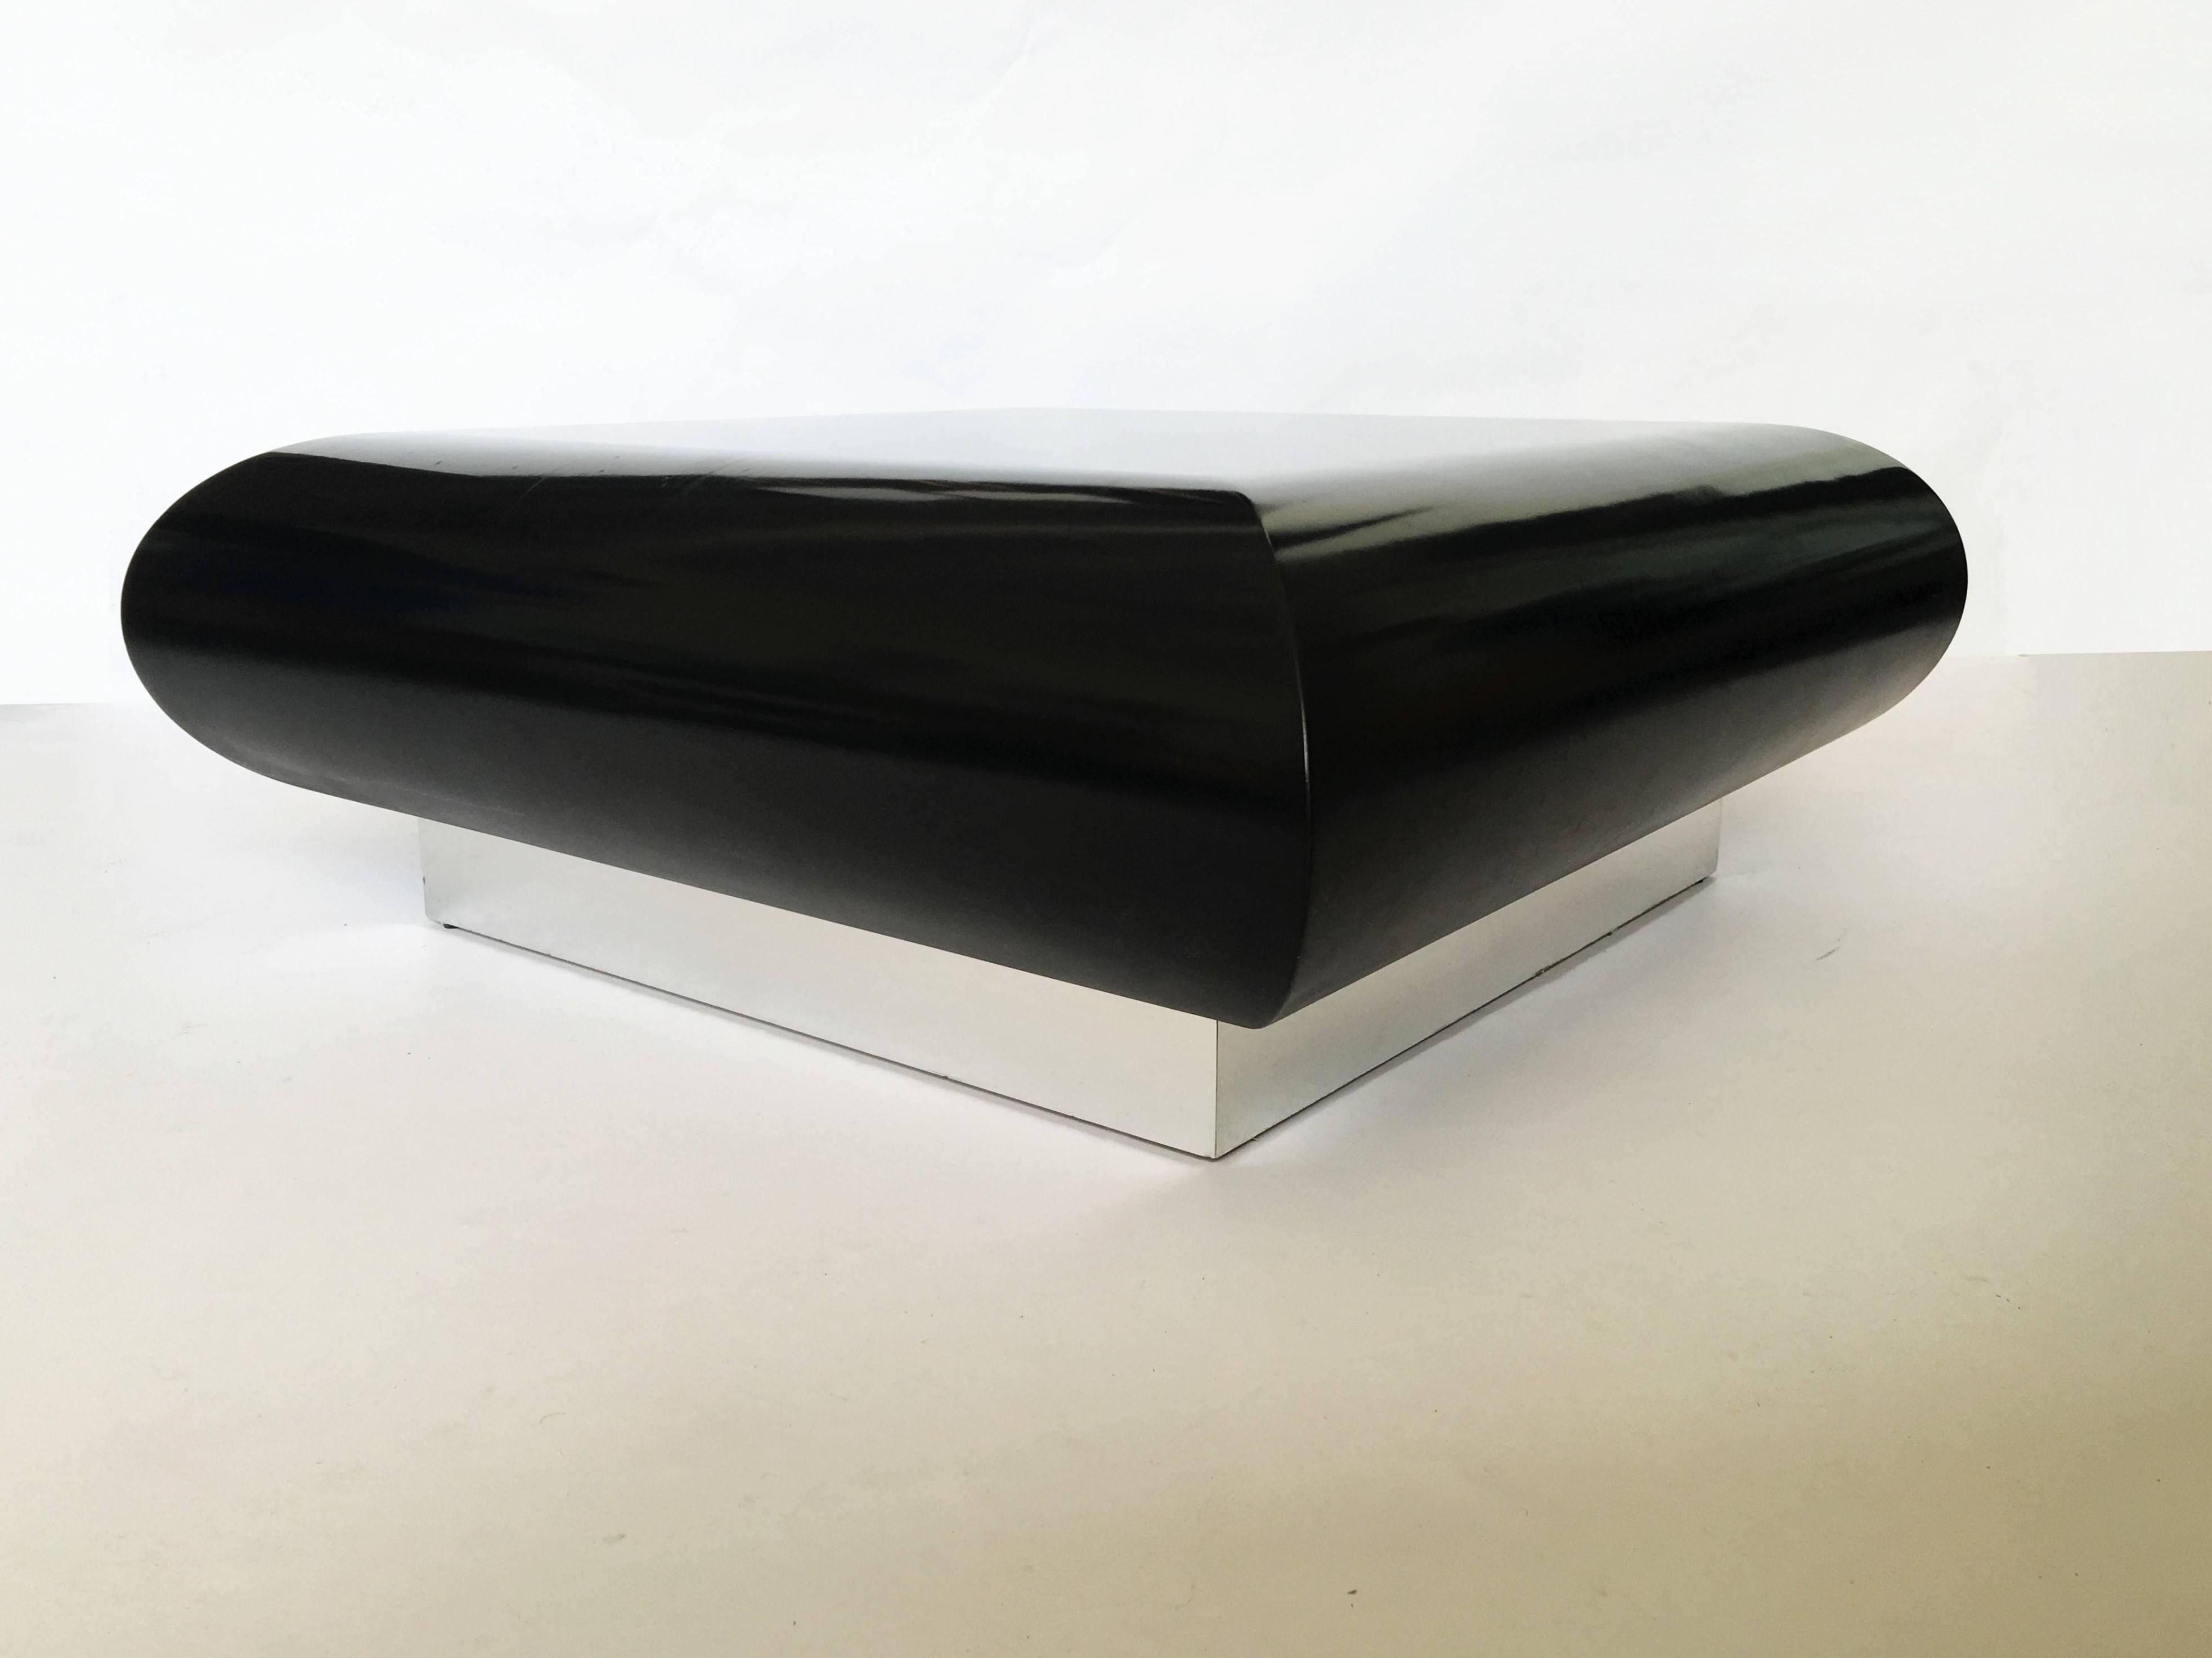 Gorgeous black gloss lacquered pillow freeform low table by Directional. Monolithic and minimal in design. The large square shape with molded convex sides appears to float above the floor on its chrome plinth base. Impeccably constructed.